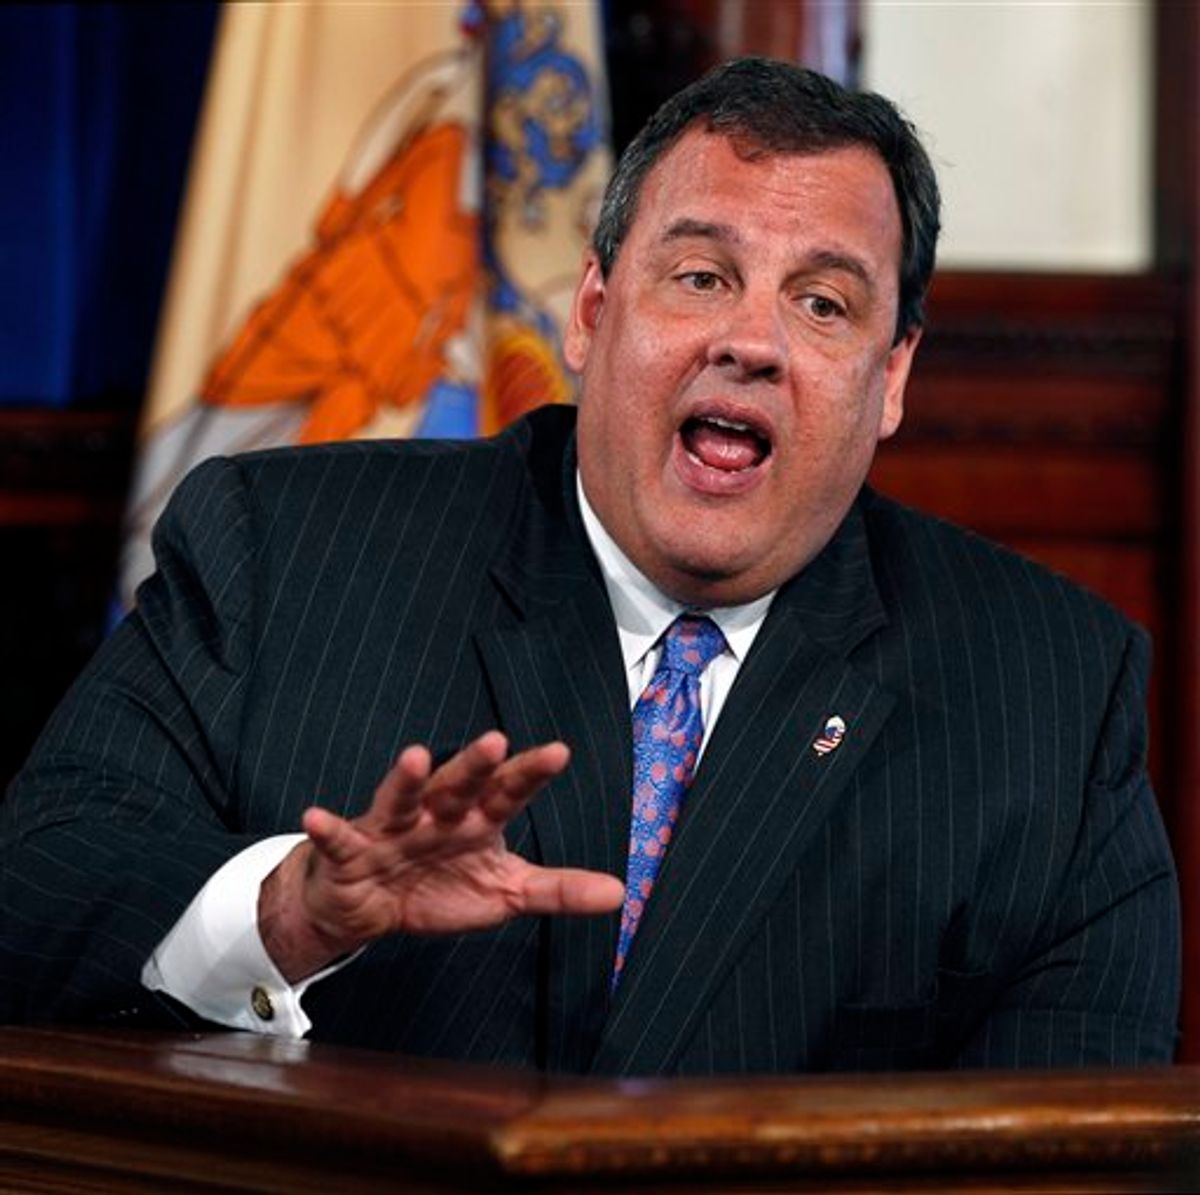 New Jersey Gov. Chris Christie gestures  Tuesday, July 19, 2011, in Trenton, N.J., as he says Billionaire businessman Ken Langone, the co-founder of The Home Depot, and other Republican donors he met with earlier Tuesday didn't persuade him to run for president. The first-term governor and GOP favorite continues to be talked about as a possible challenger to President Barack Obama, but his answer has consistently been 'no.' Christie met Langone and the others in Manhattan. Afterward, the governor reported: "I said nothing different to him today than I've said to other folks in the past." (AP Photo/Mel Evans) (AP)